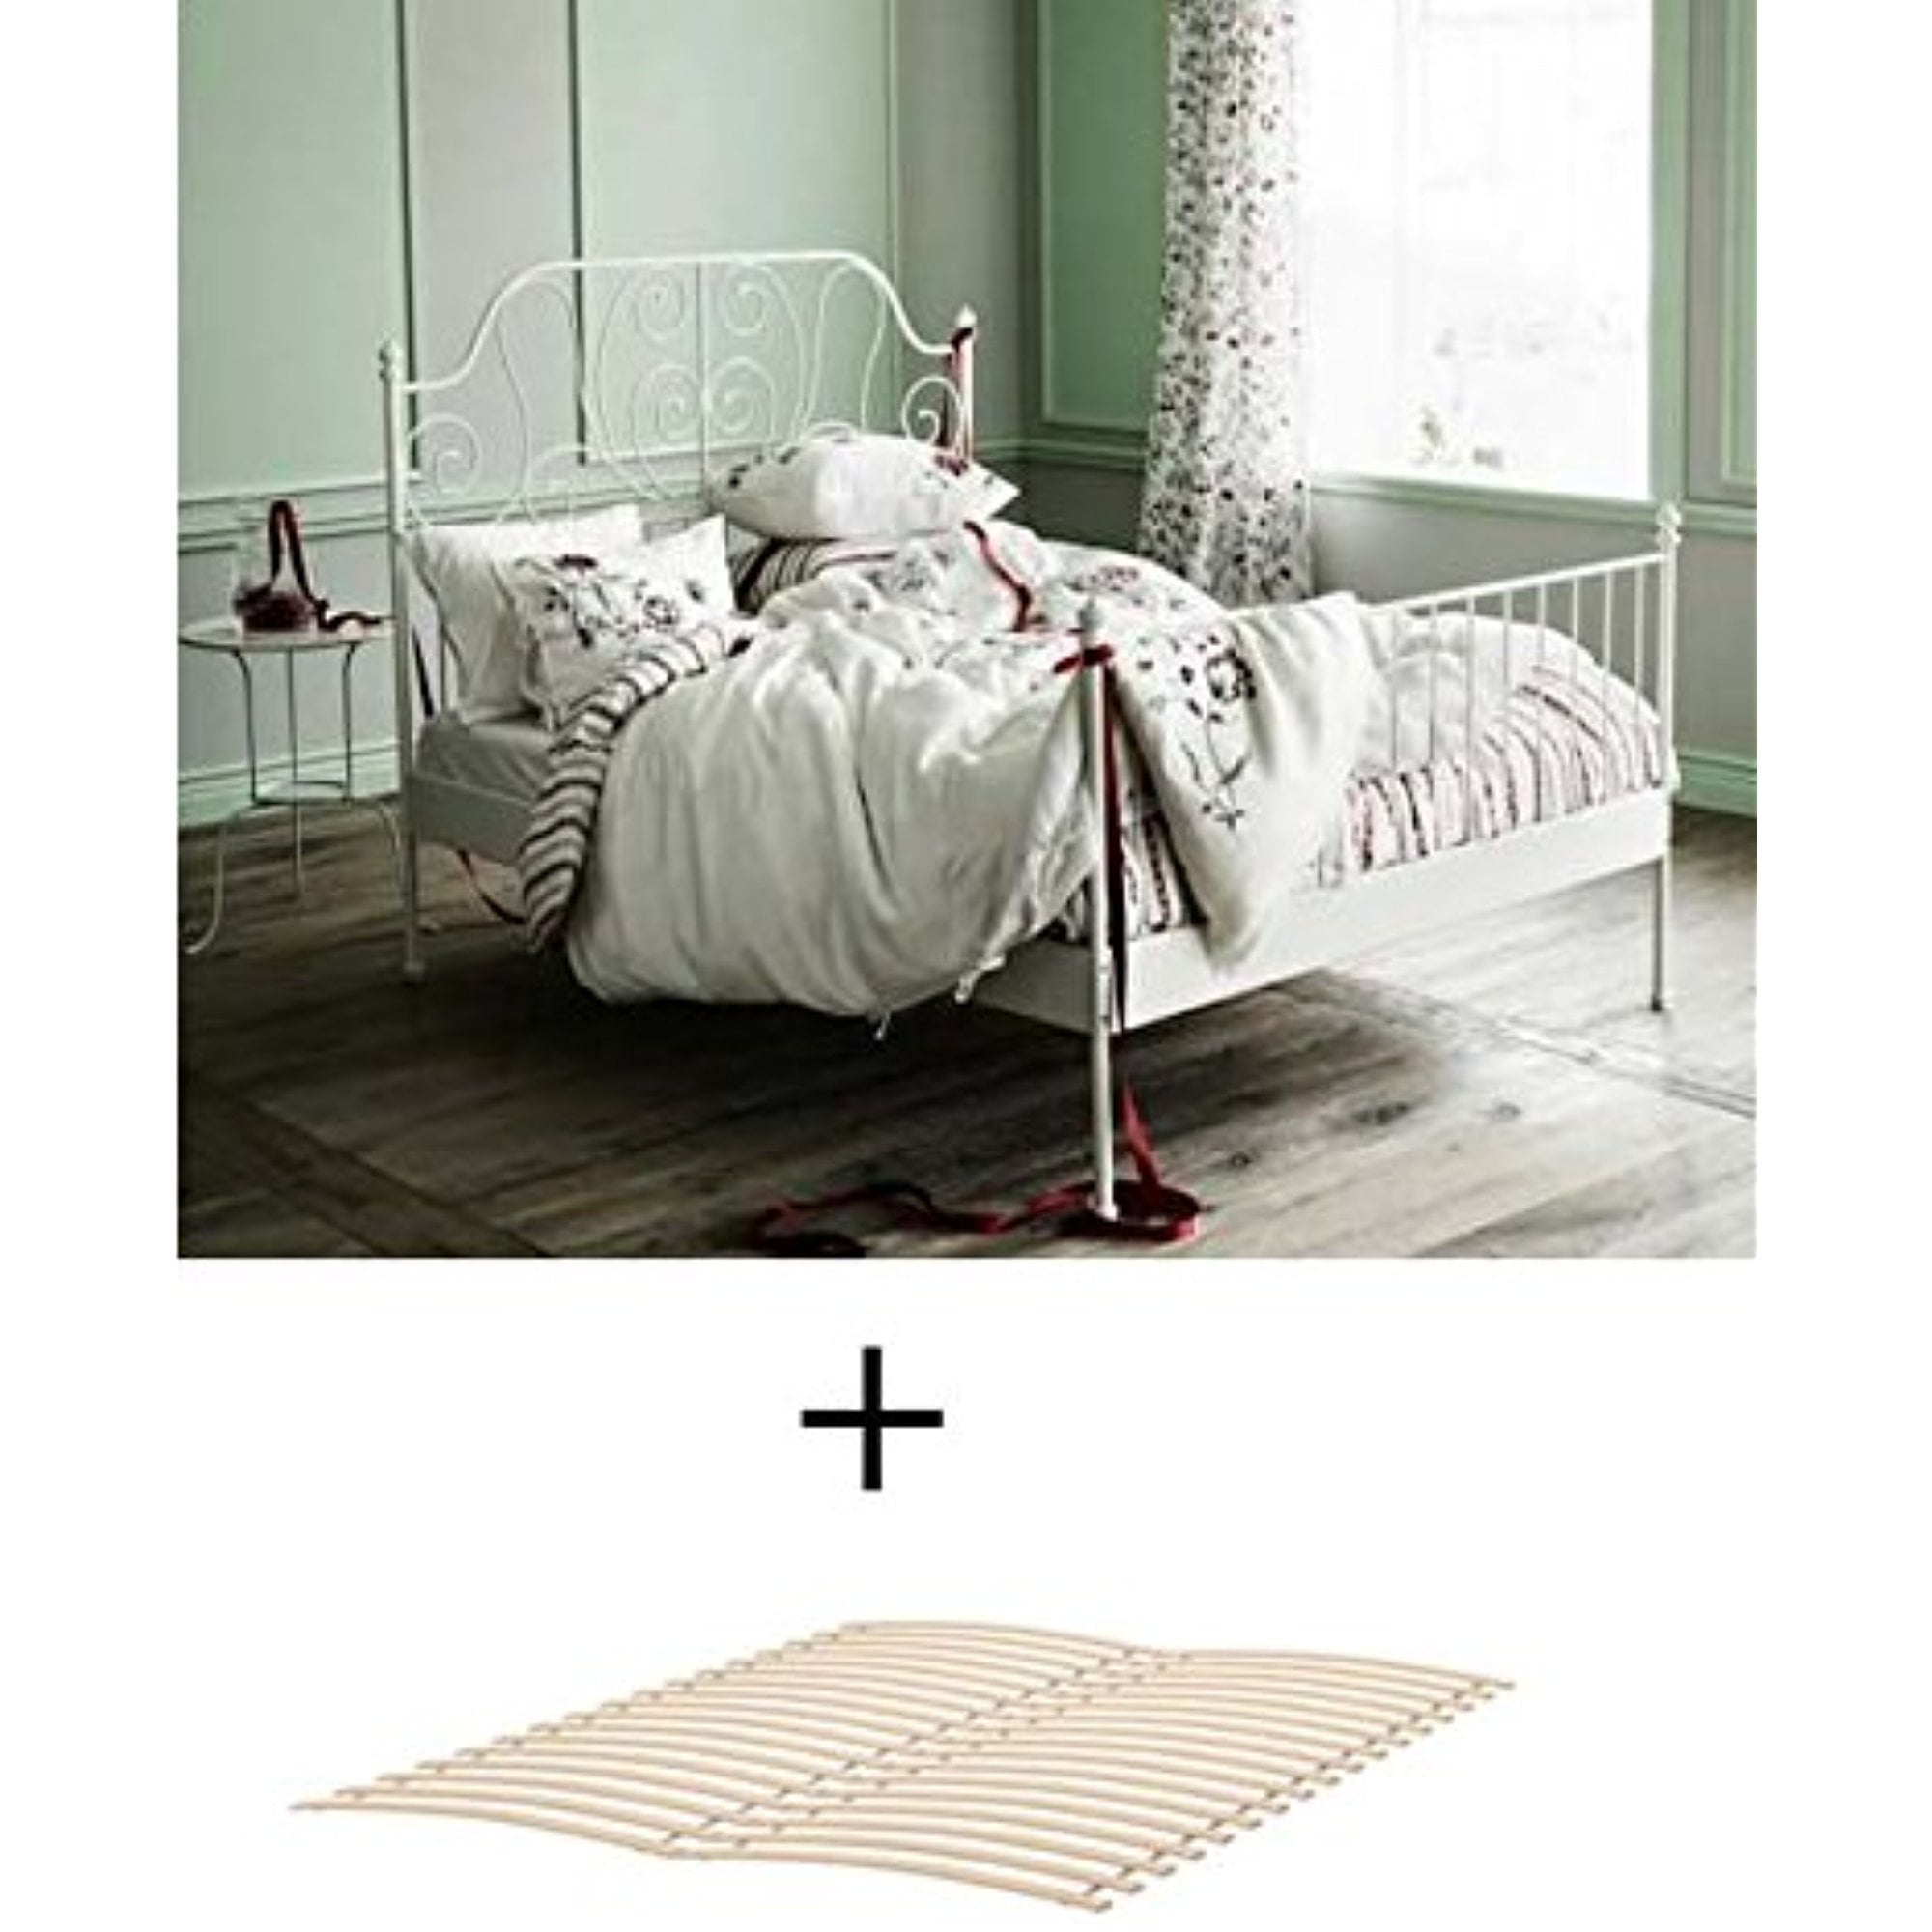 Ikea Queen Size Metal Country Style Bed, Ikea White Iron Bed Frame